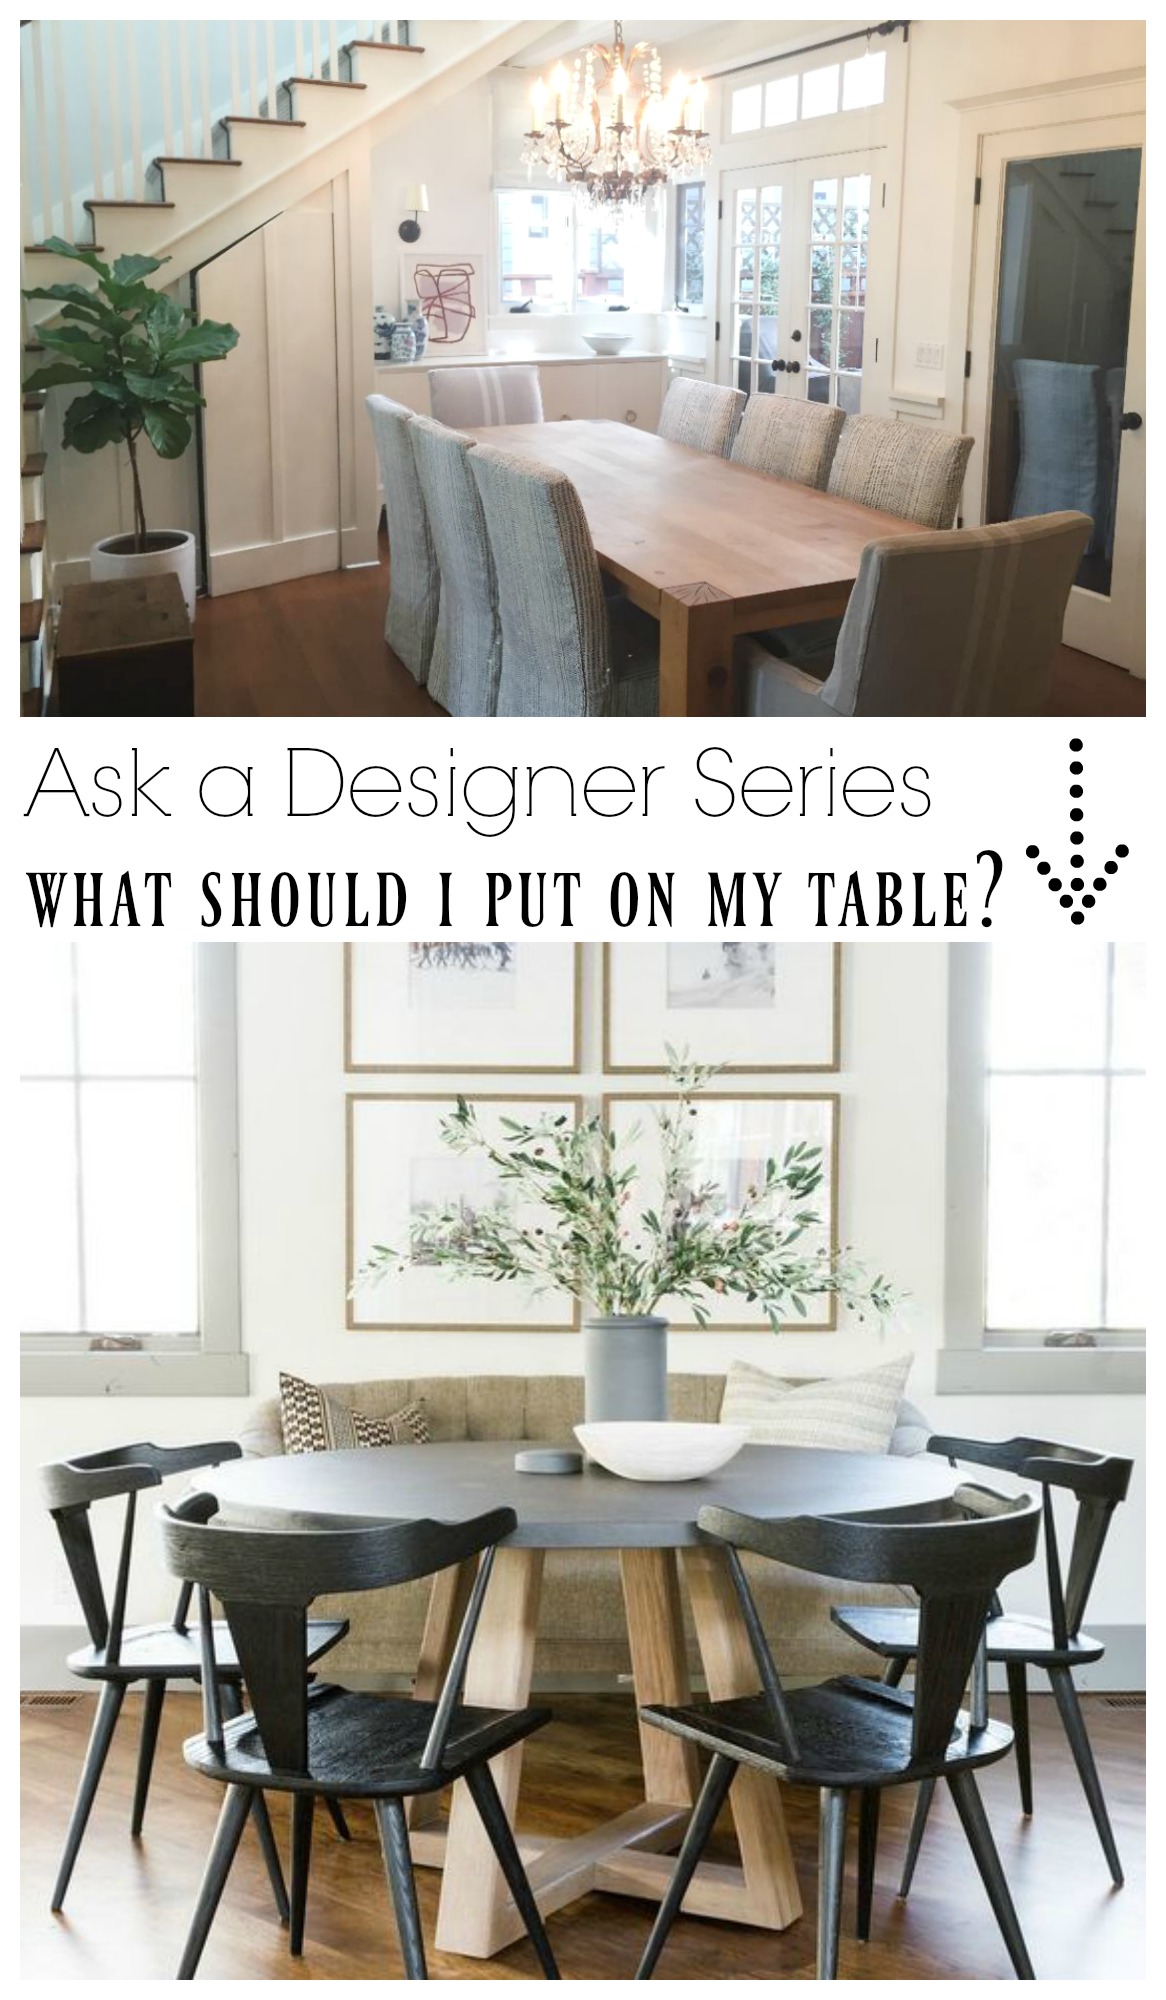 Ask a Designer Series- What should I put on my kithcen table?